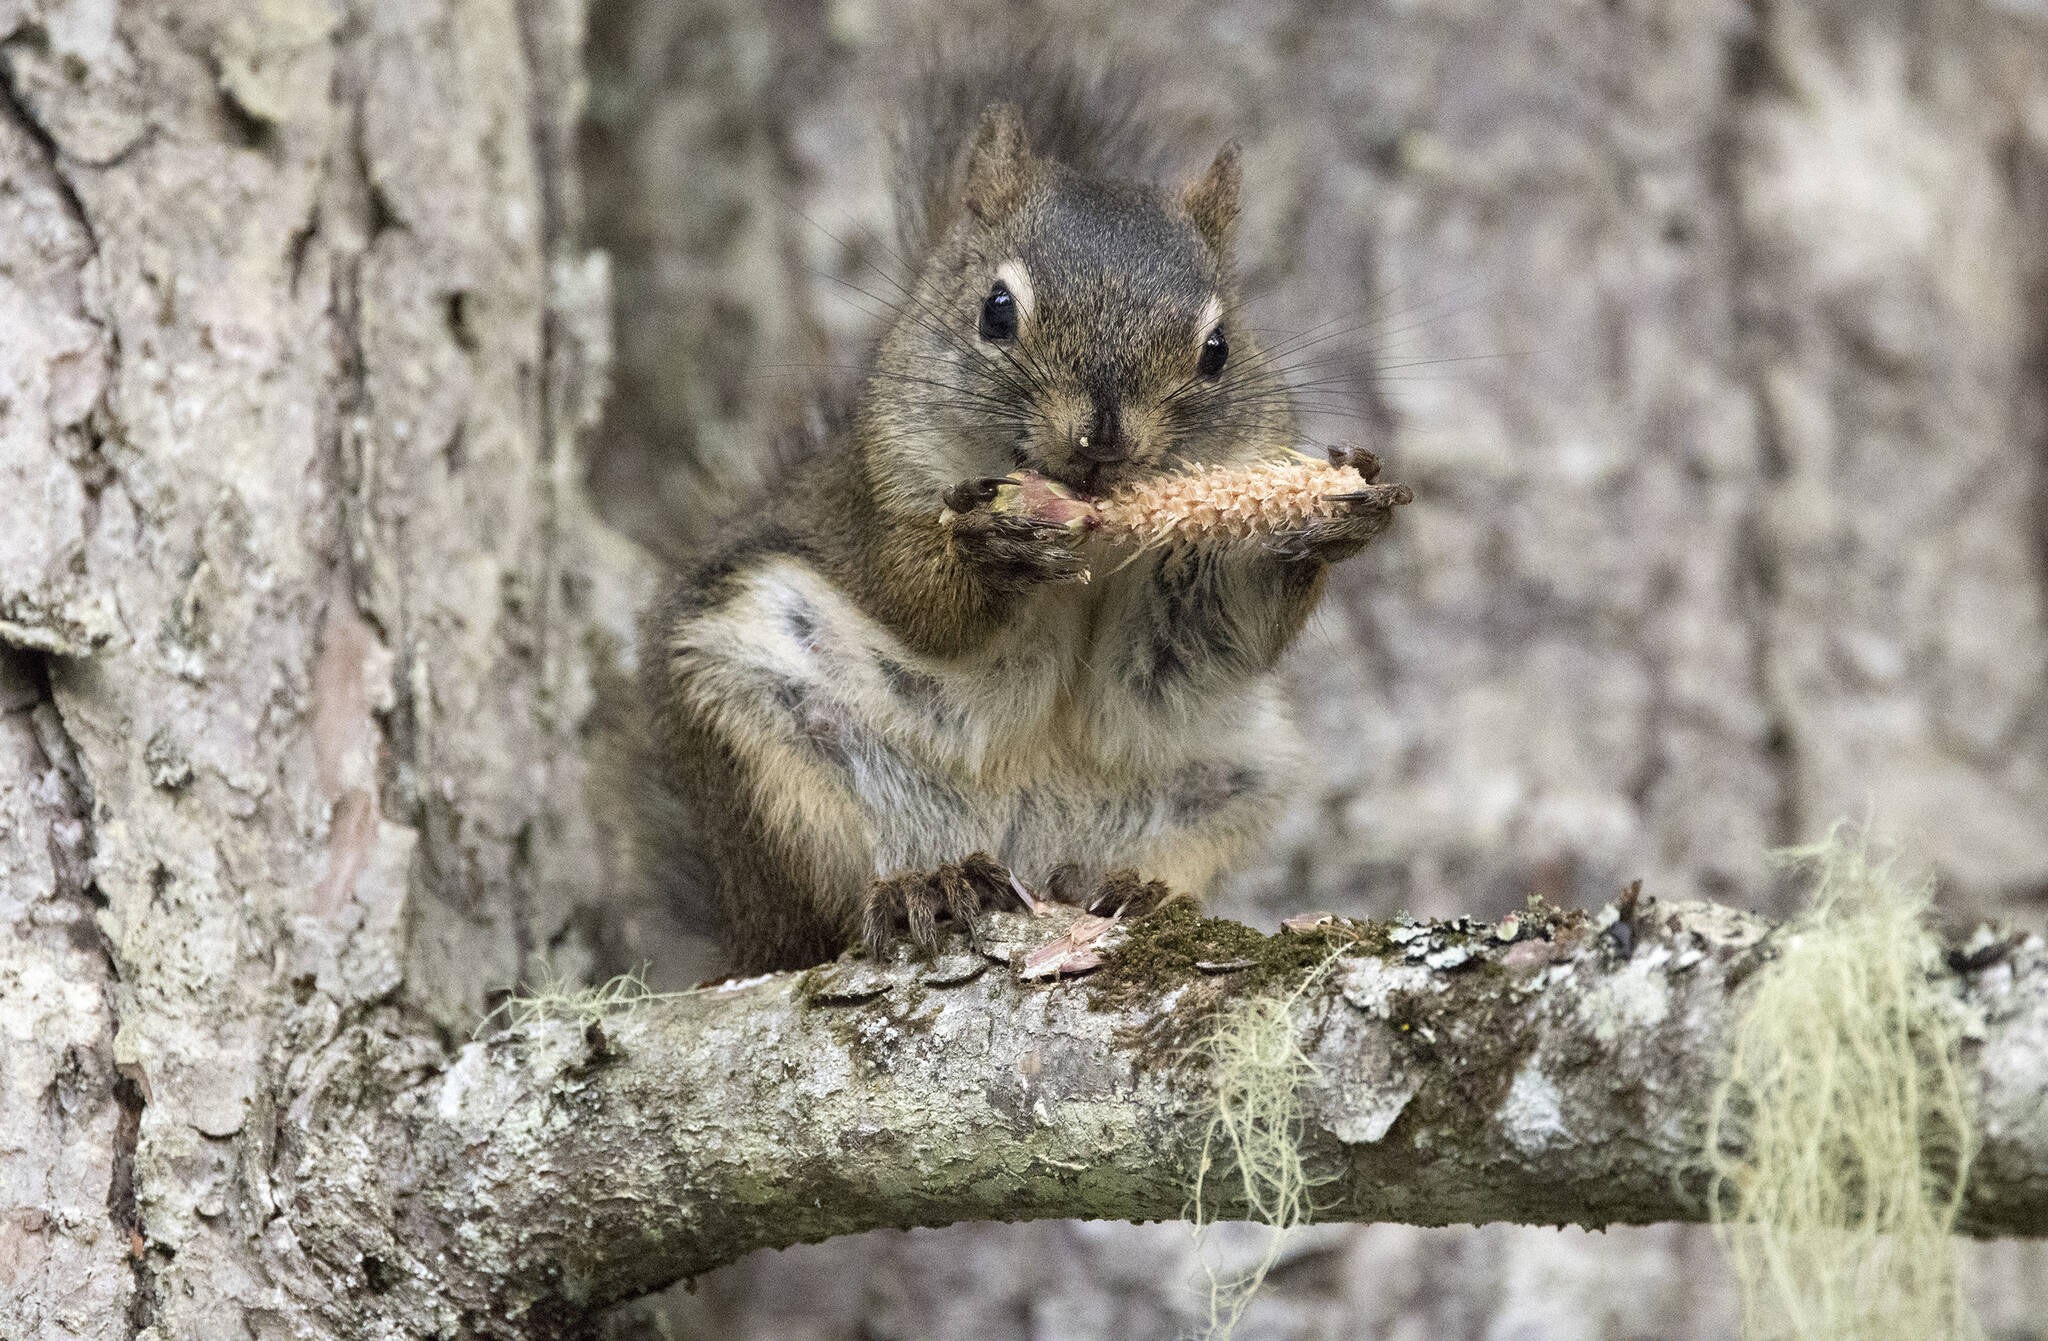 Pine cones on the menu for an American red squirrel spotted in Juneau on July 14. (Courtesy Photo / Kenneth Gill, gillfoto)